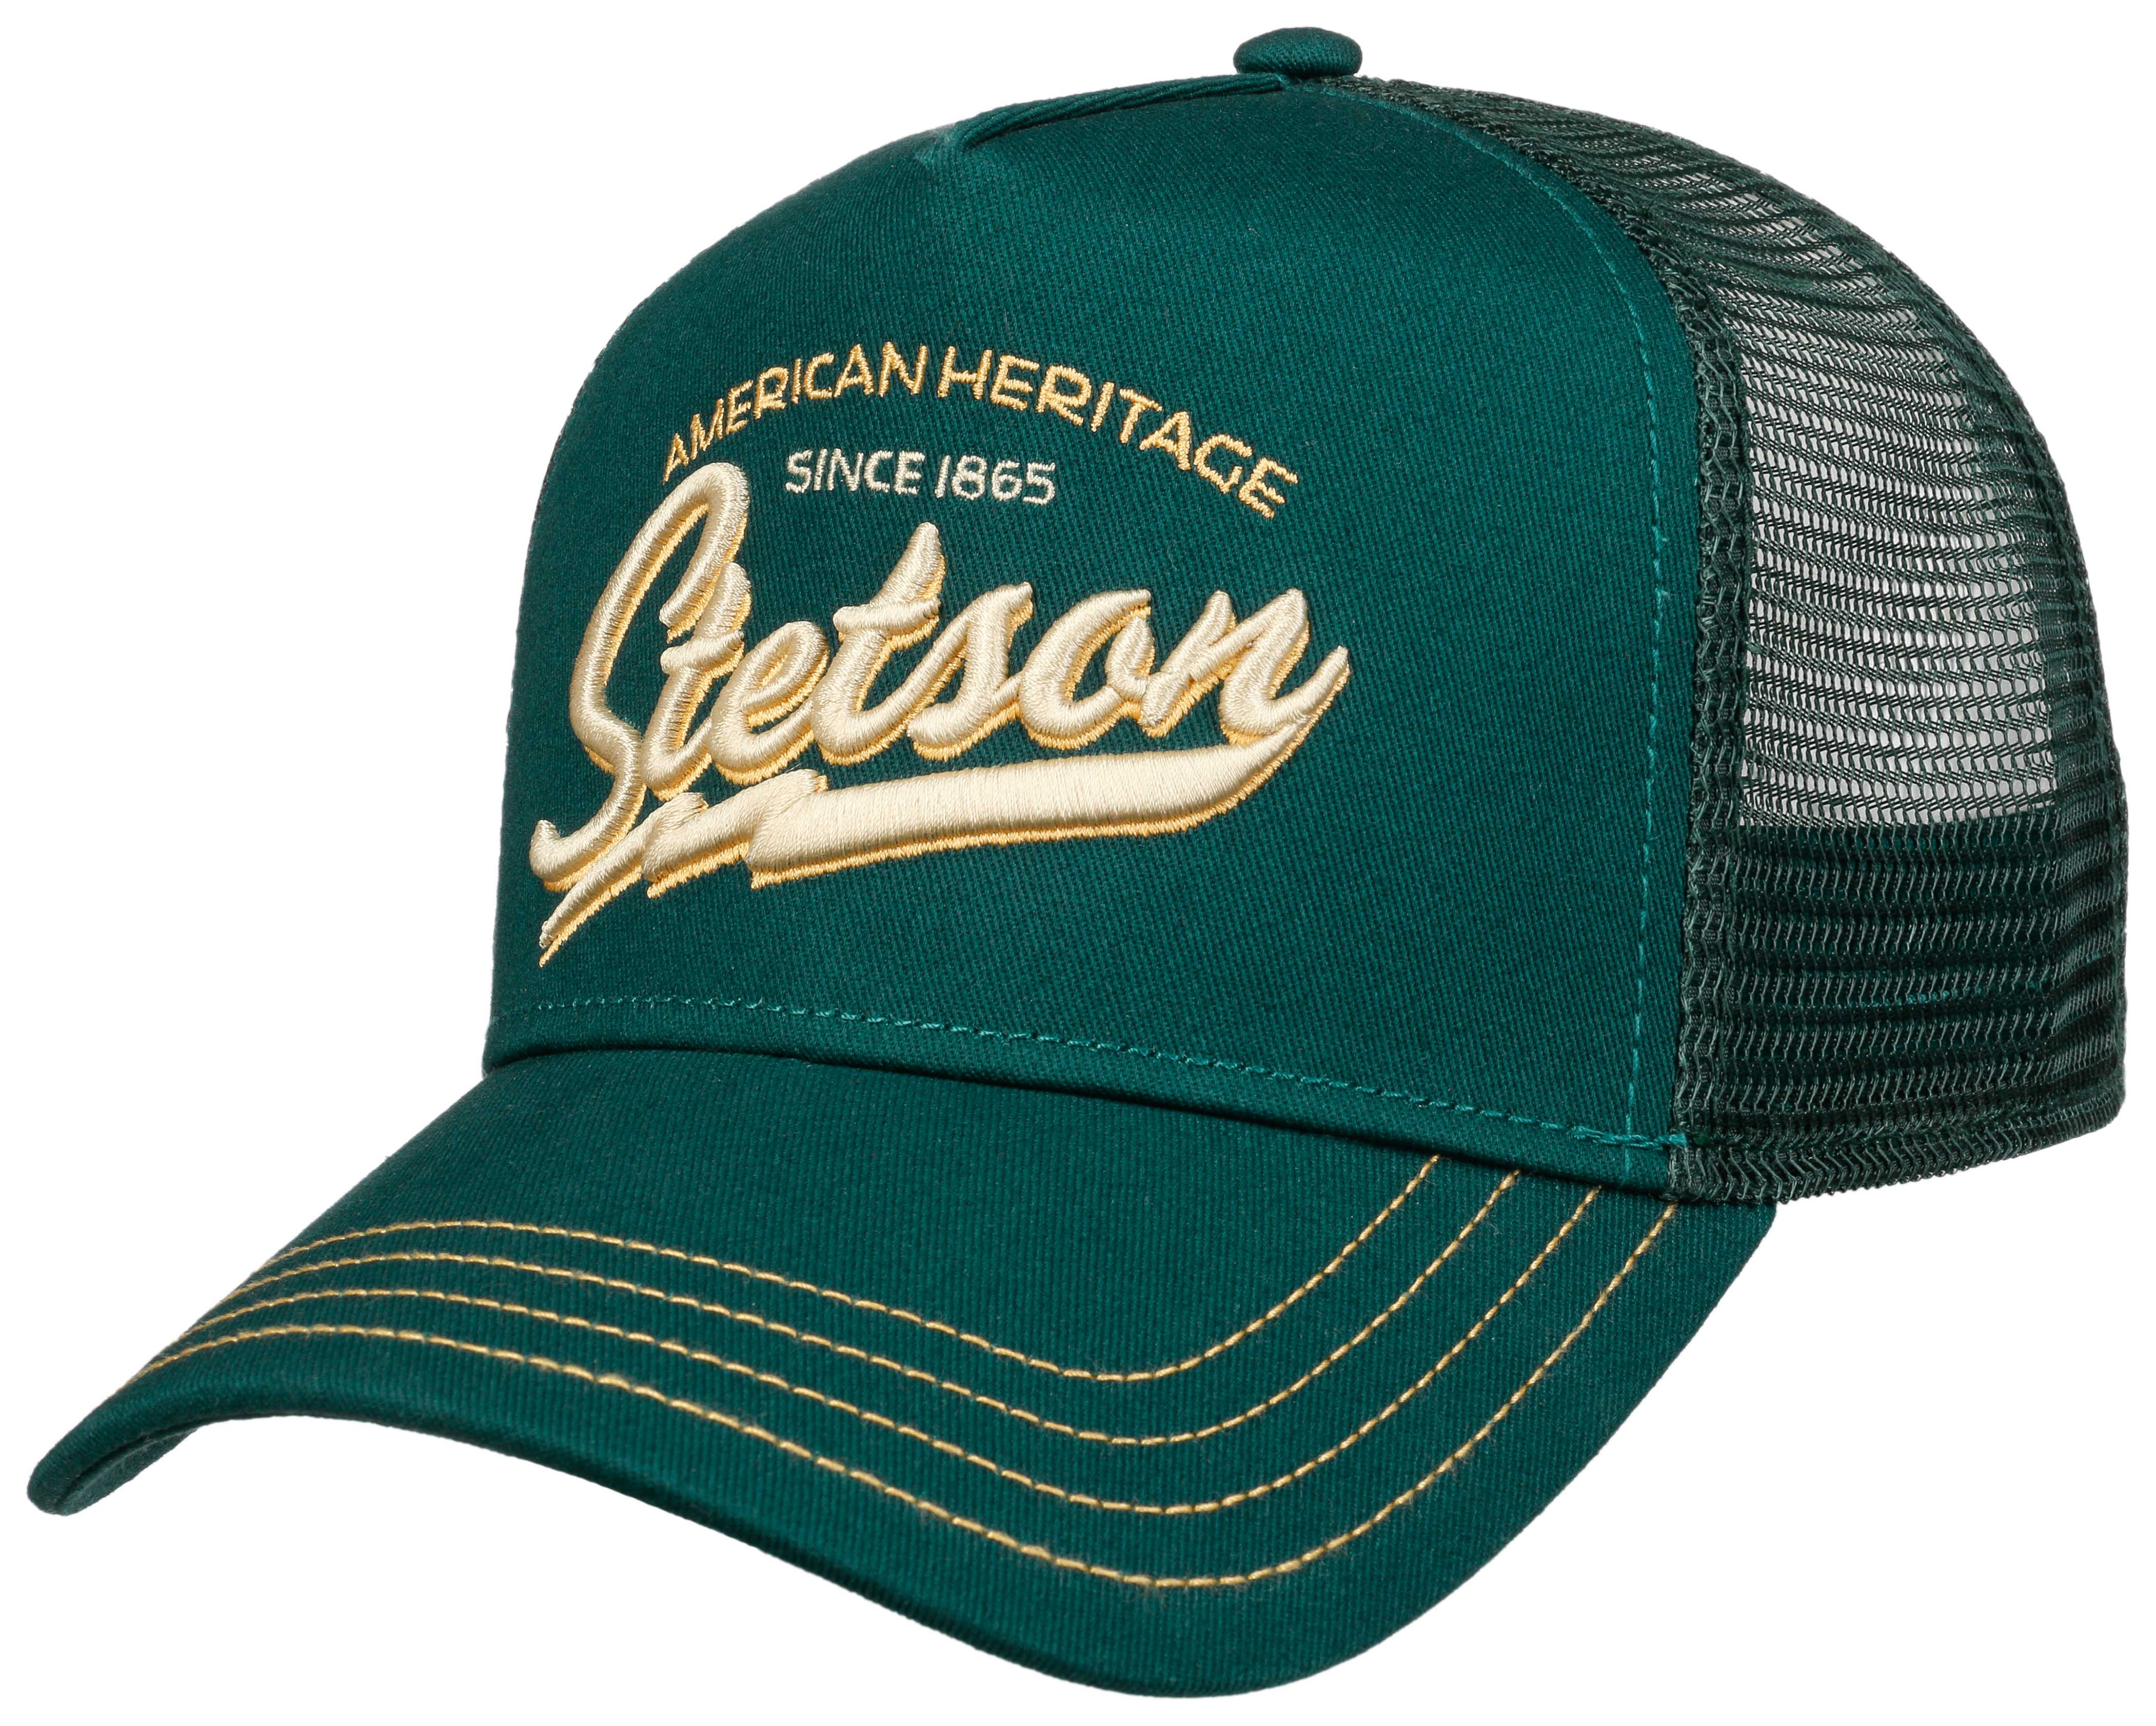 Stetson Stetson Trucker Cap American Heritage Classic Washed Green 56-60 cm, Washed Green